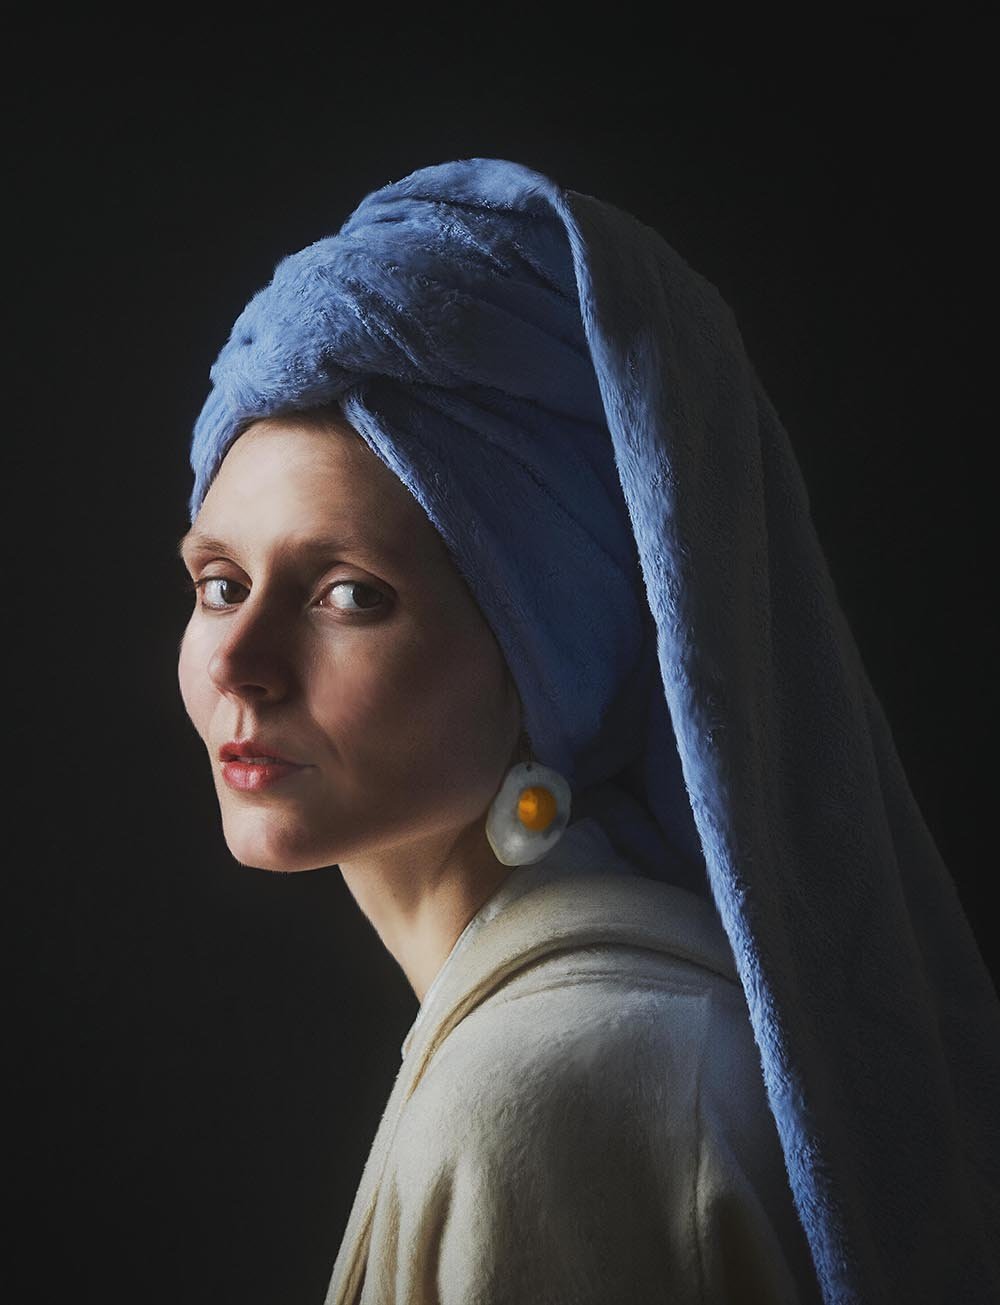 Julia Keil playing the Girl with a pearl earring